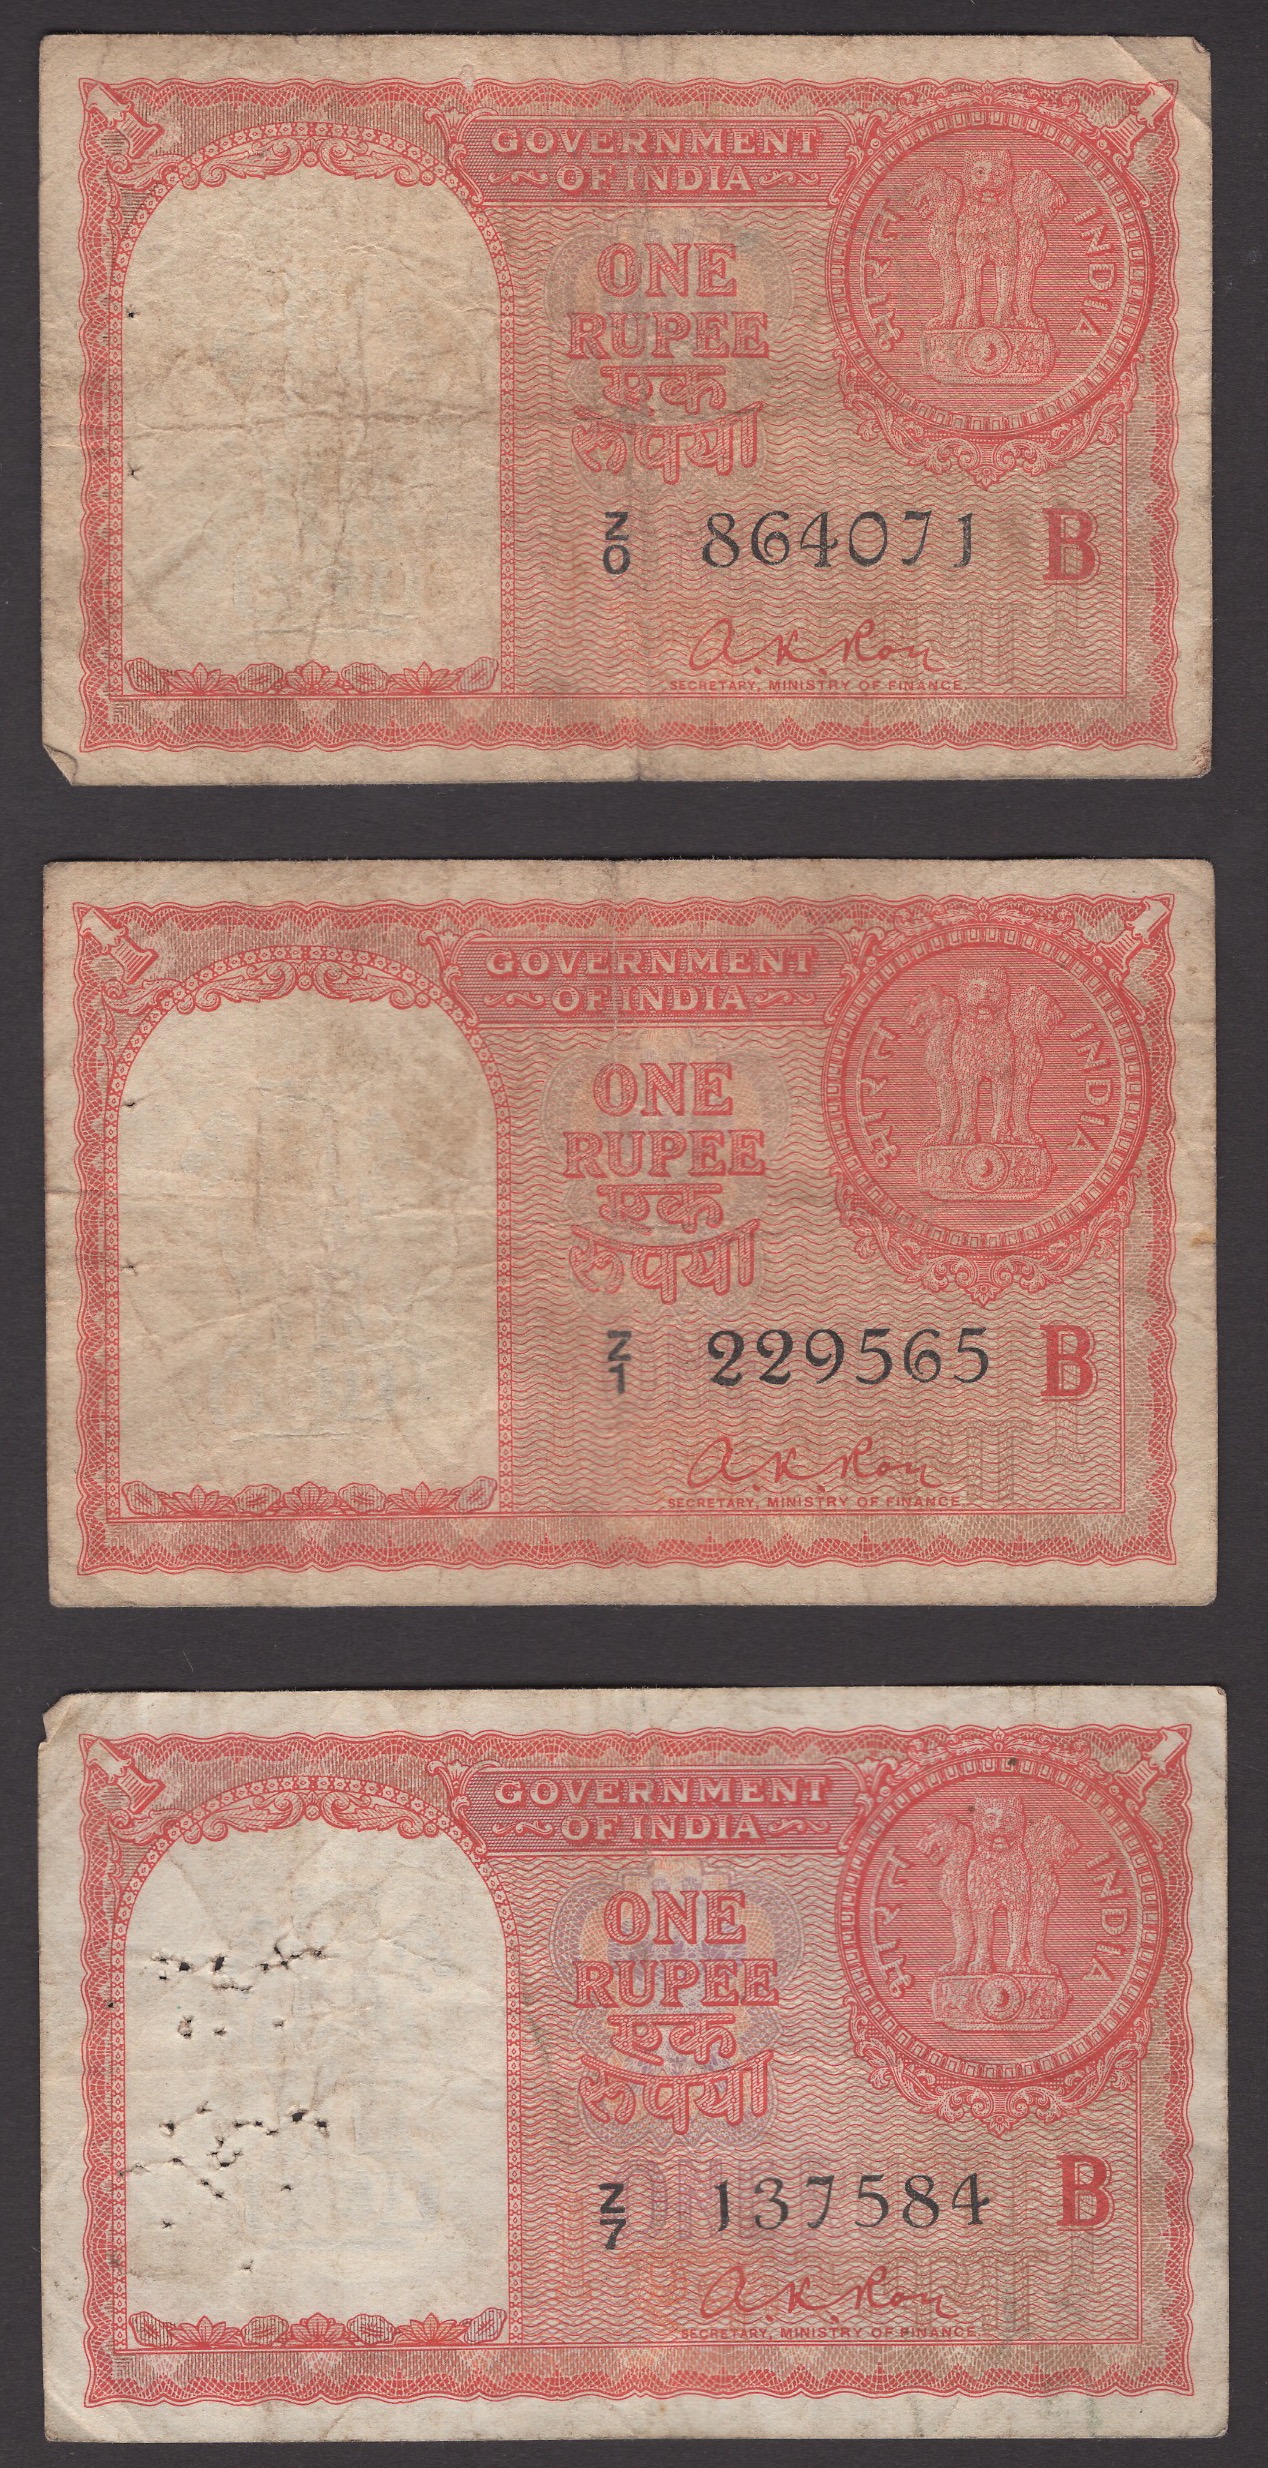 Government of India, Persian Gulf Issue, 1 Rupee (5), ND (1957-62), prefixes Z/0, Z/1, Z/3,...